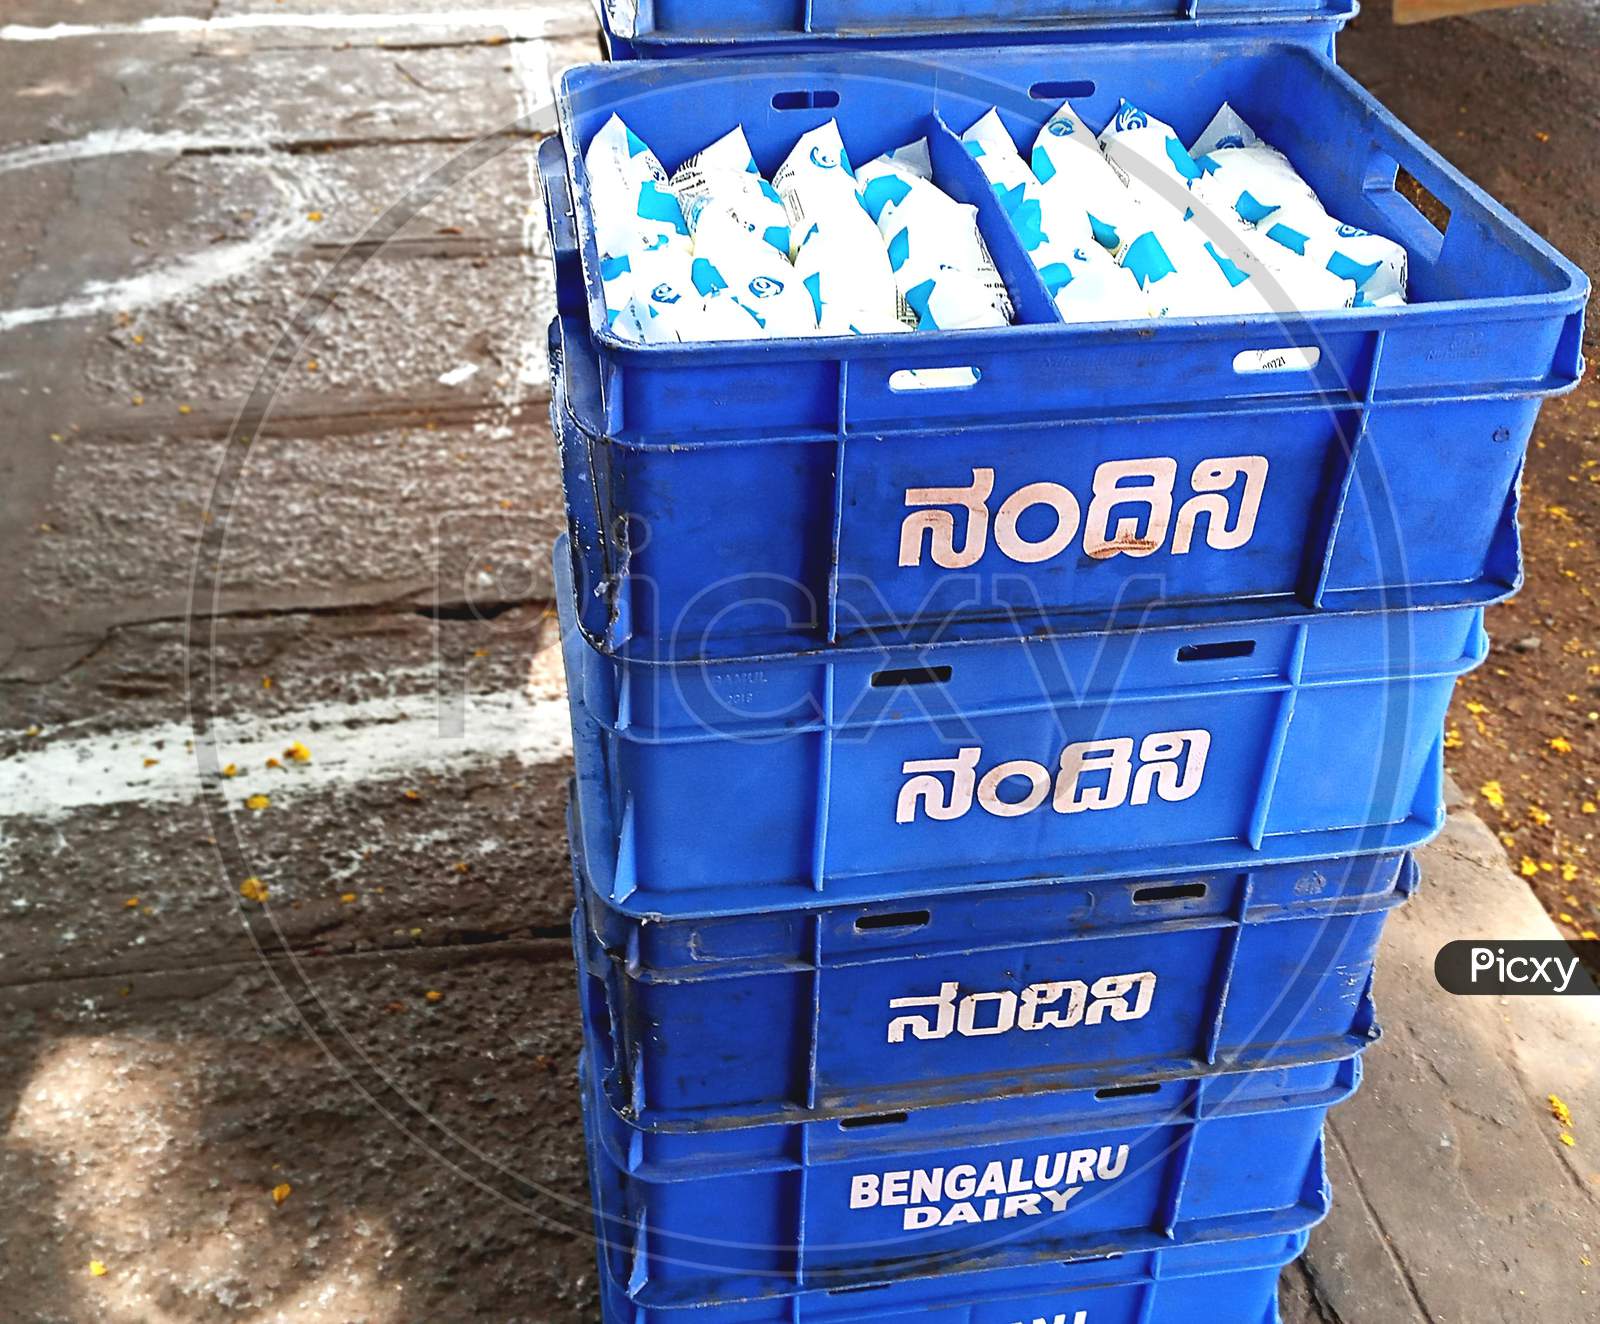 Crates of nandini milk packet kept in front of retail shop